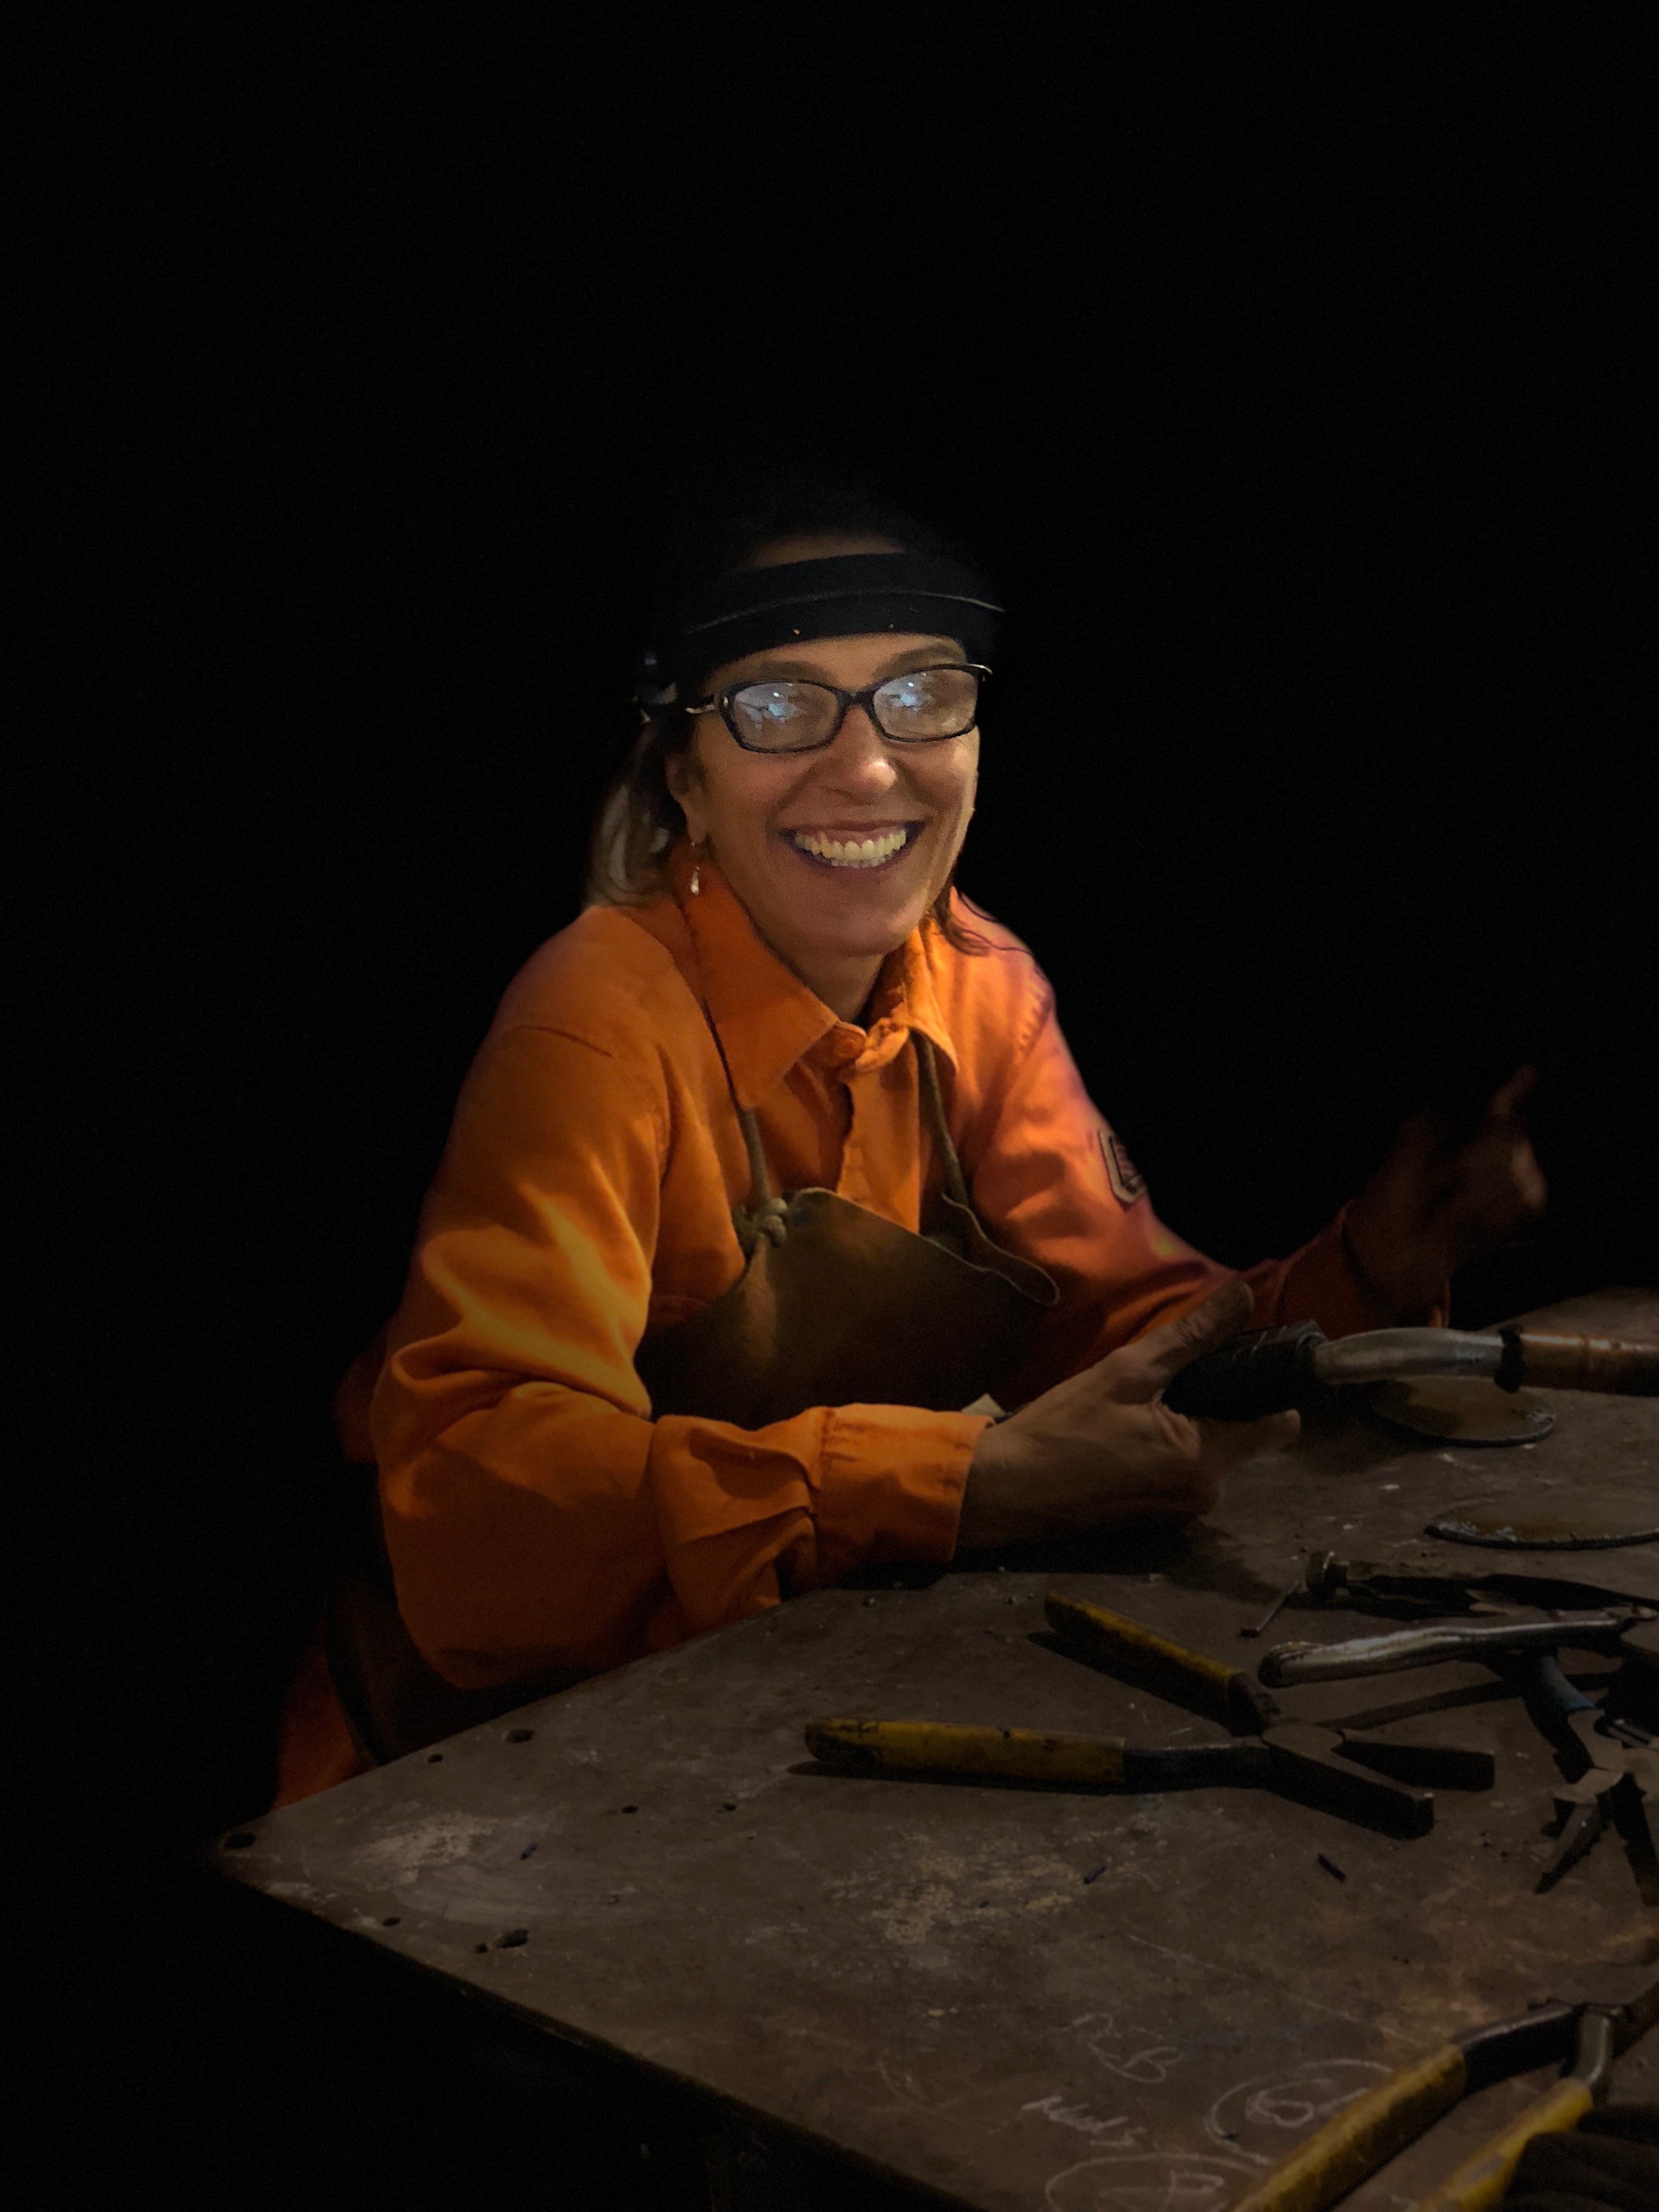 A smiling, light-skinned woman sits in a dark room. In front of her is a table with tools, including pliers. In her hand, she holds a blowtorch. She wears dark-rimmed glasses, an apron, an orange jumpsuit, and what seems to be a form of protective headgear.